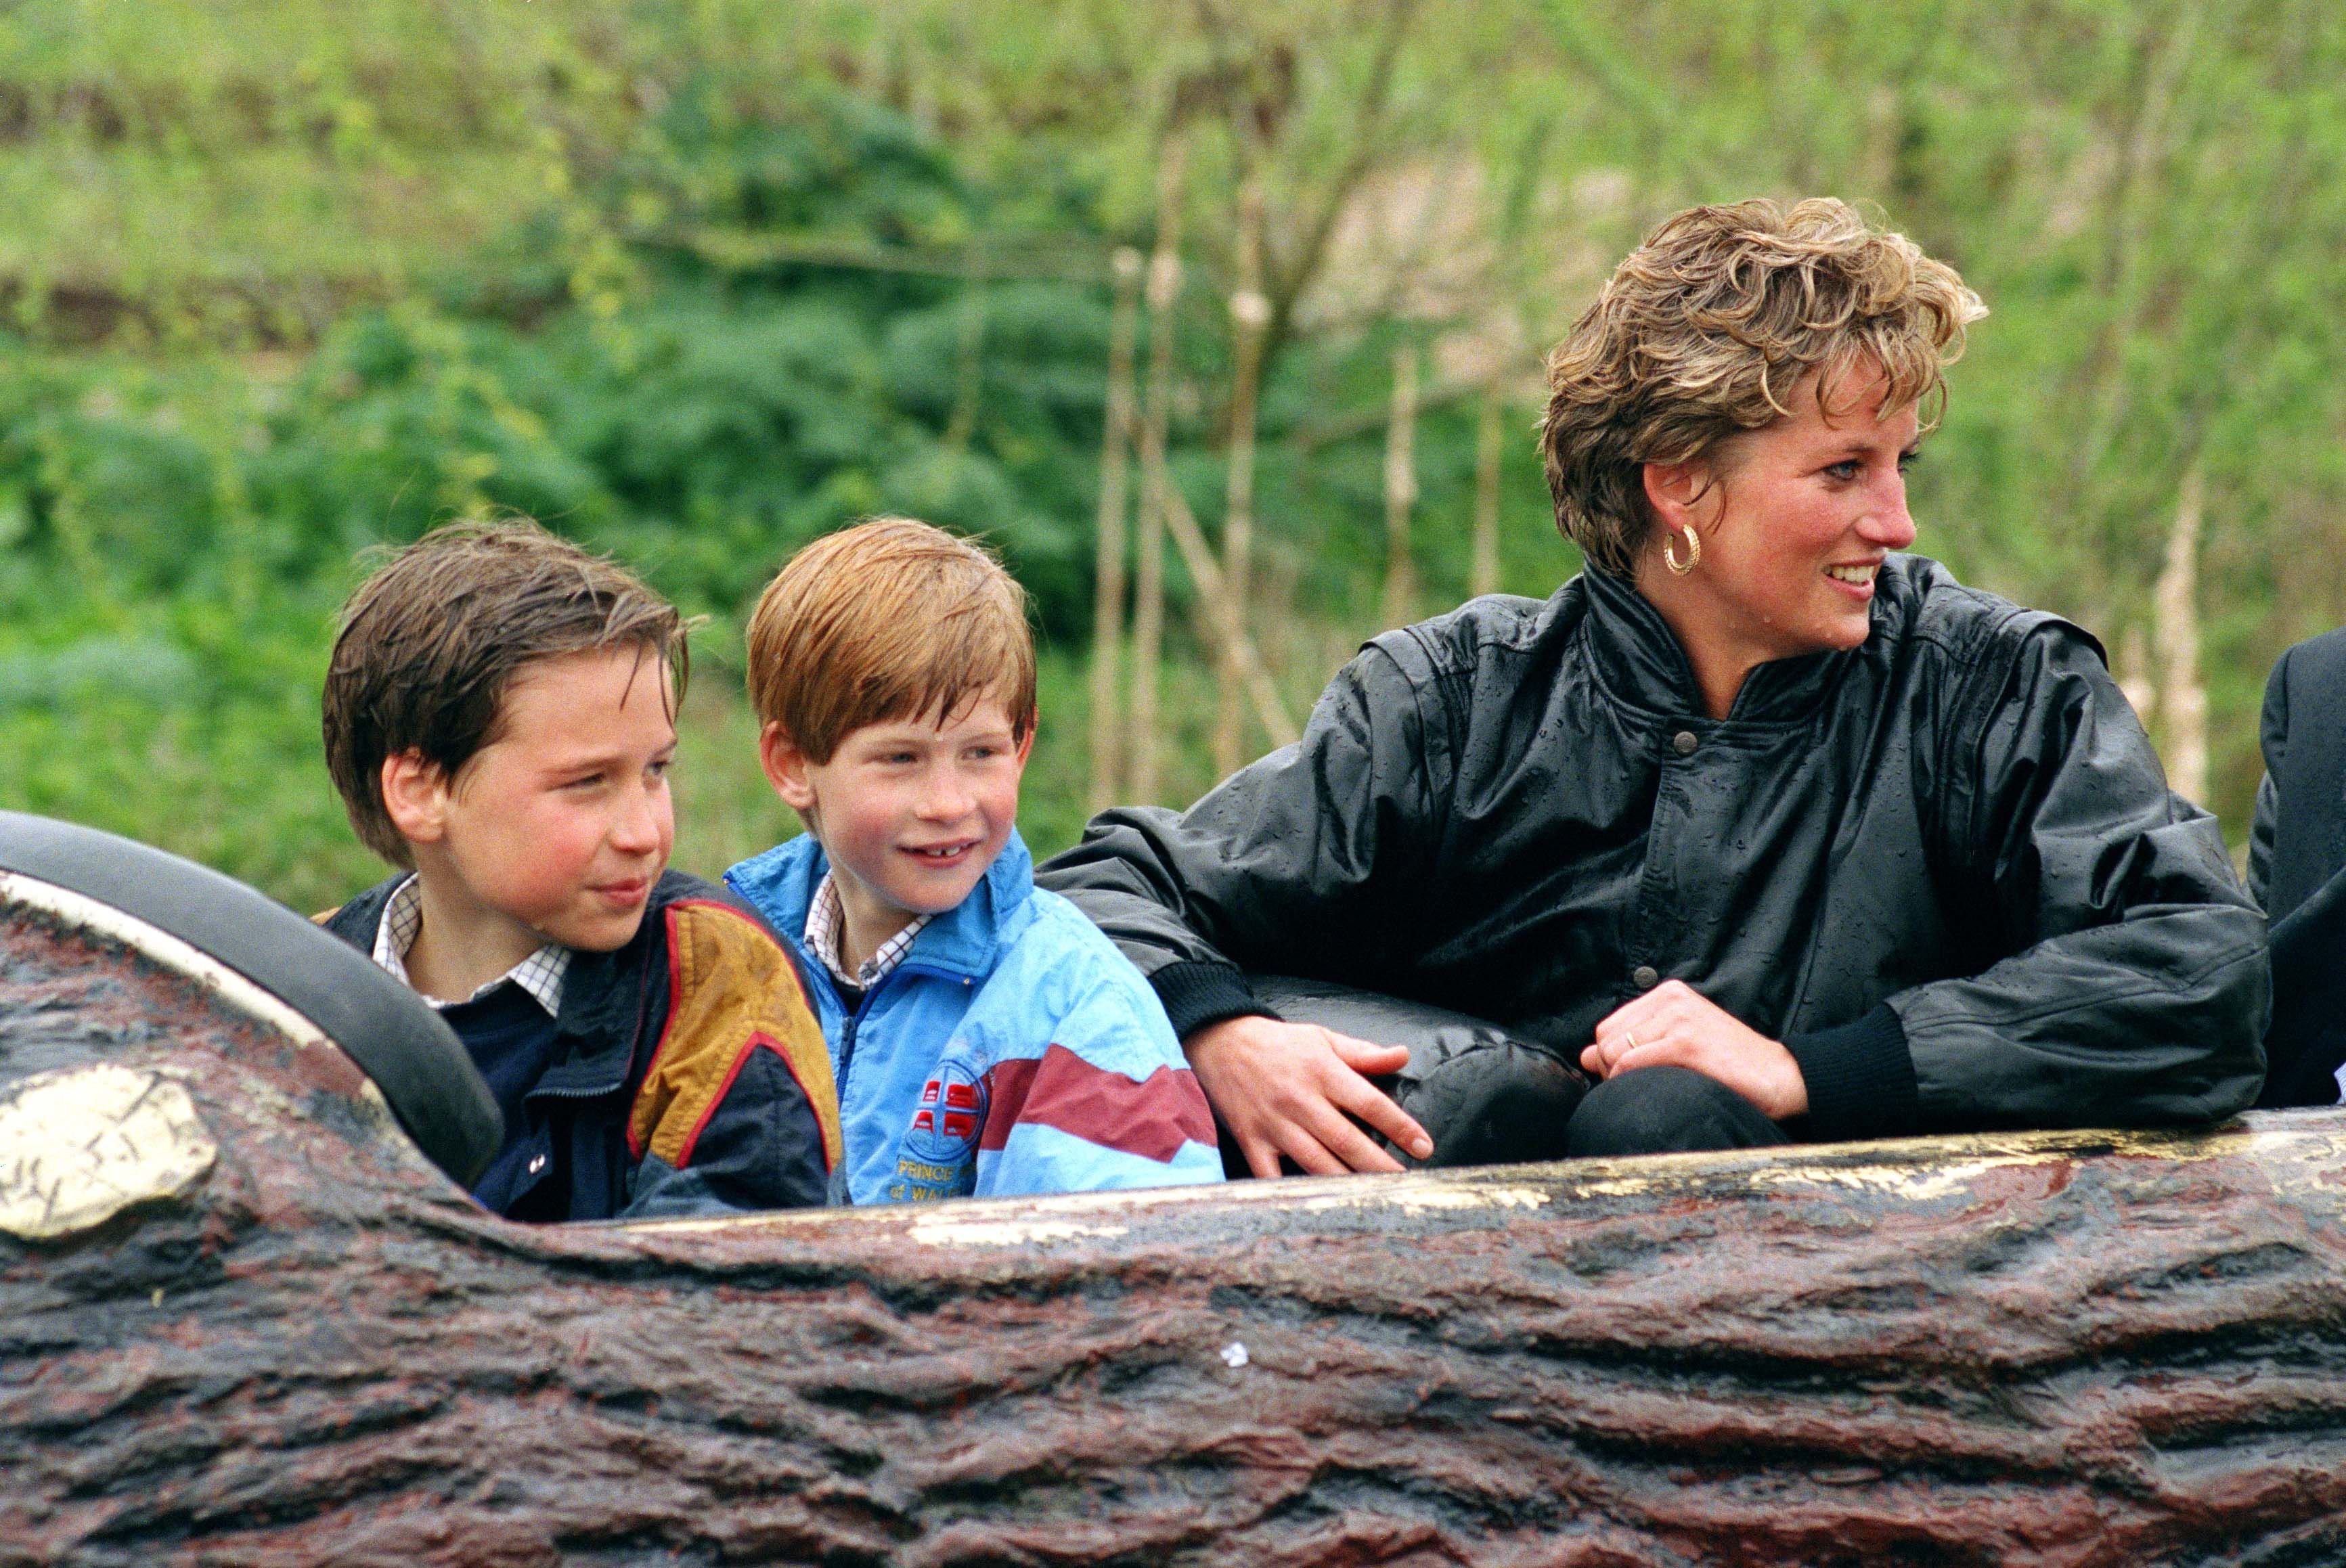 Diana Princess and sons Prince William and Prince Harry at The 'Thorpe Park' Amusement Park | Photo: Getty Images